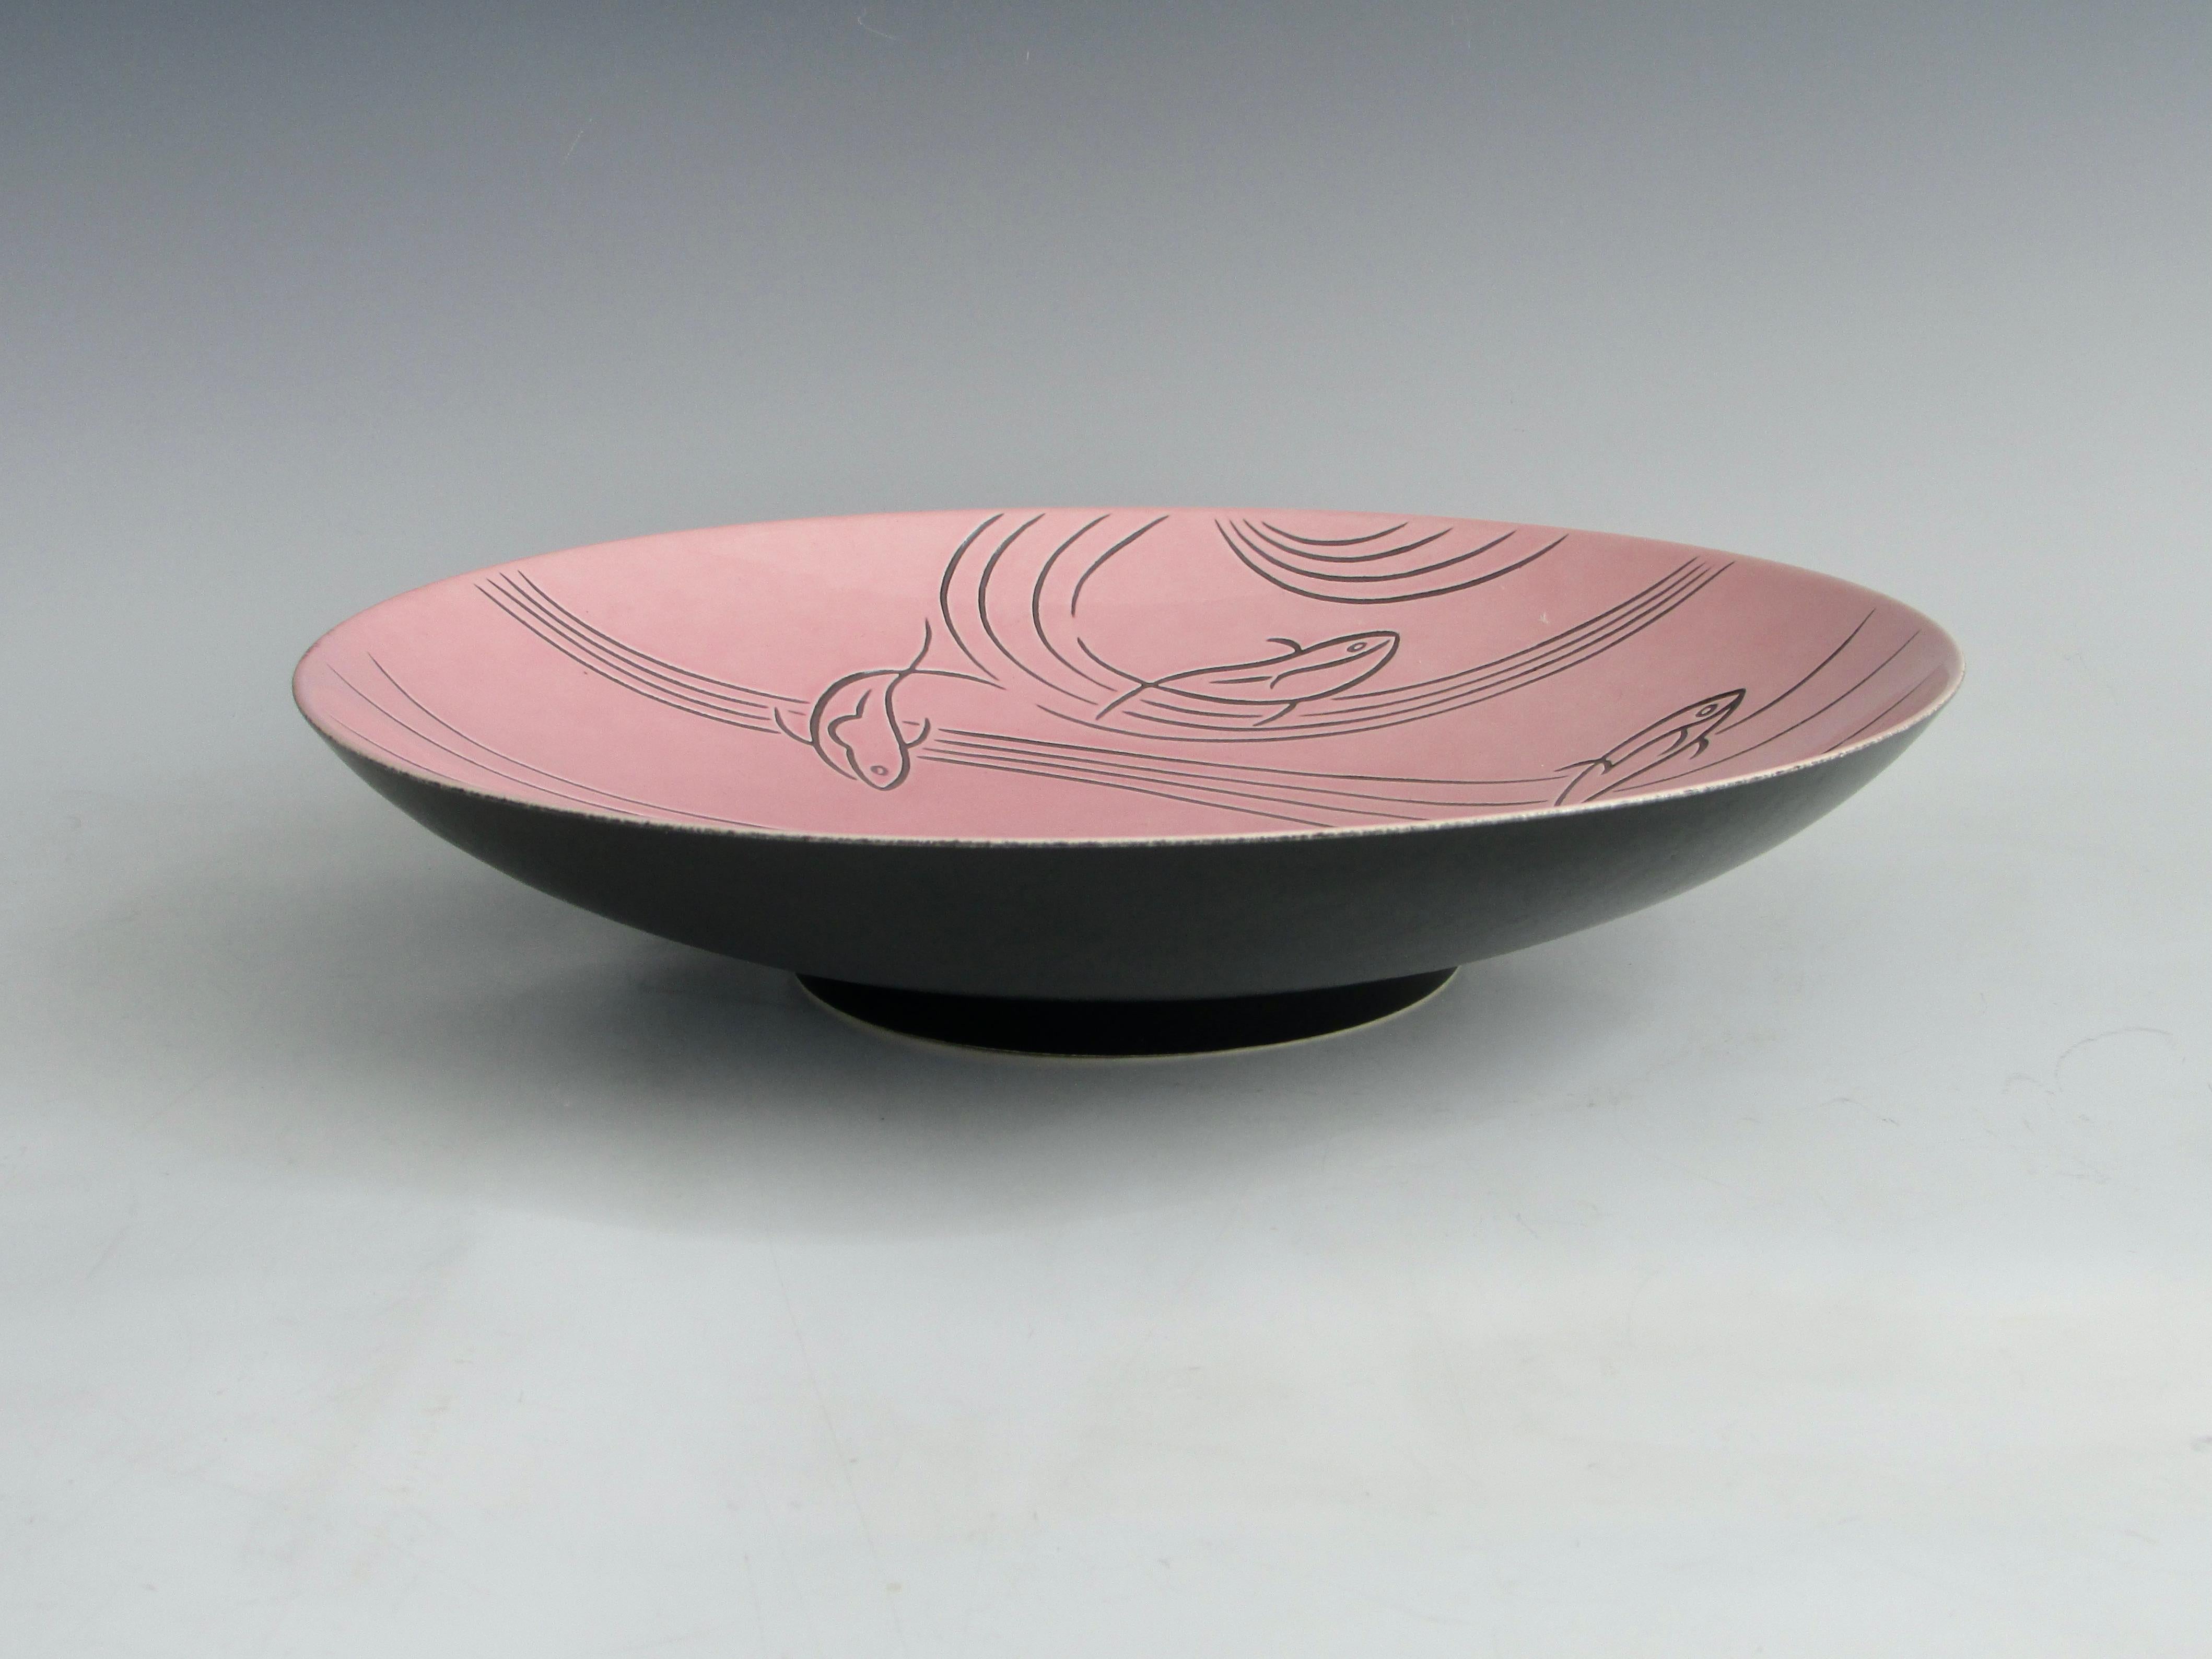 Pink glazed Roselane pottery bowl with free form swirl and Fish Design in black . Exterior of bowl in matte black finish stamped Roselane on underside. Produced by Roselane pottery of Pasadena Ca.